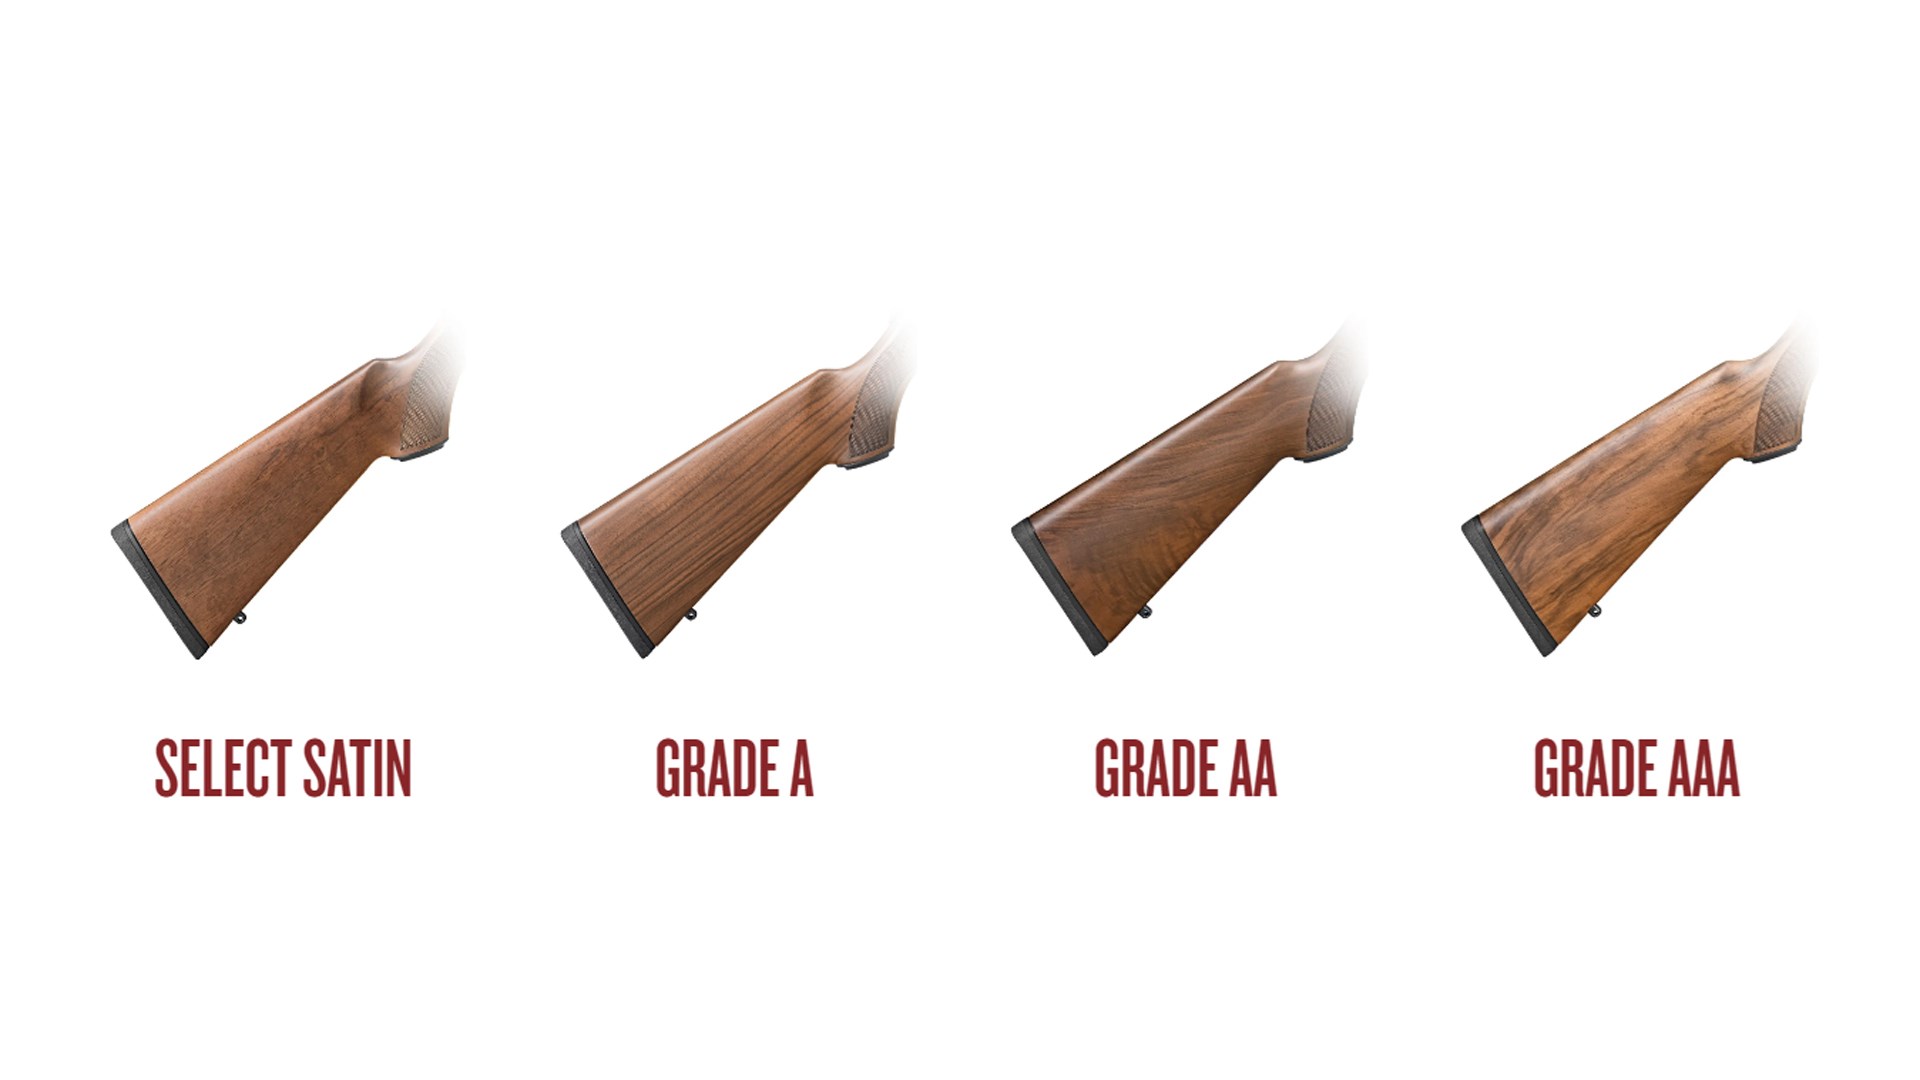 Comparison of the differing grades of wood stocks offered on the Springfield Model 2020 Rimfire Sporter rifle.